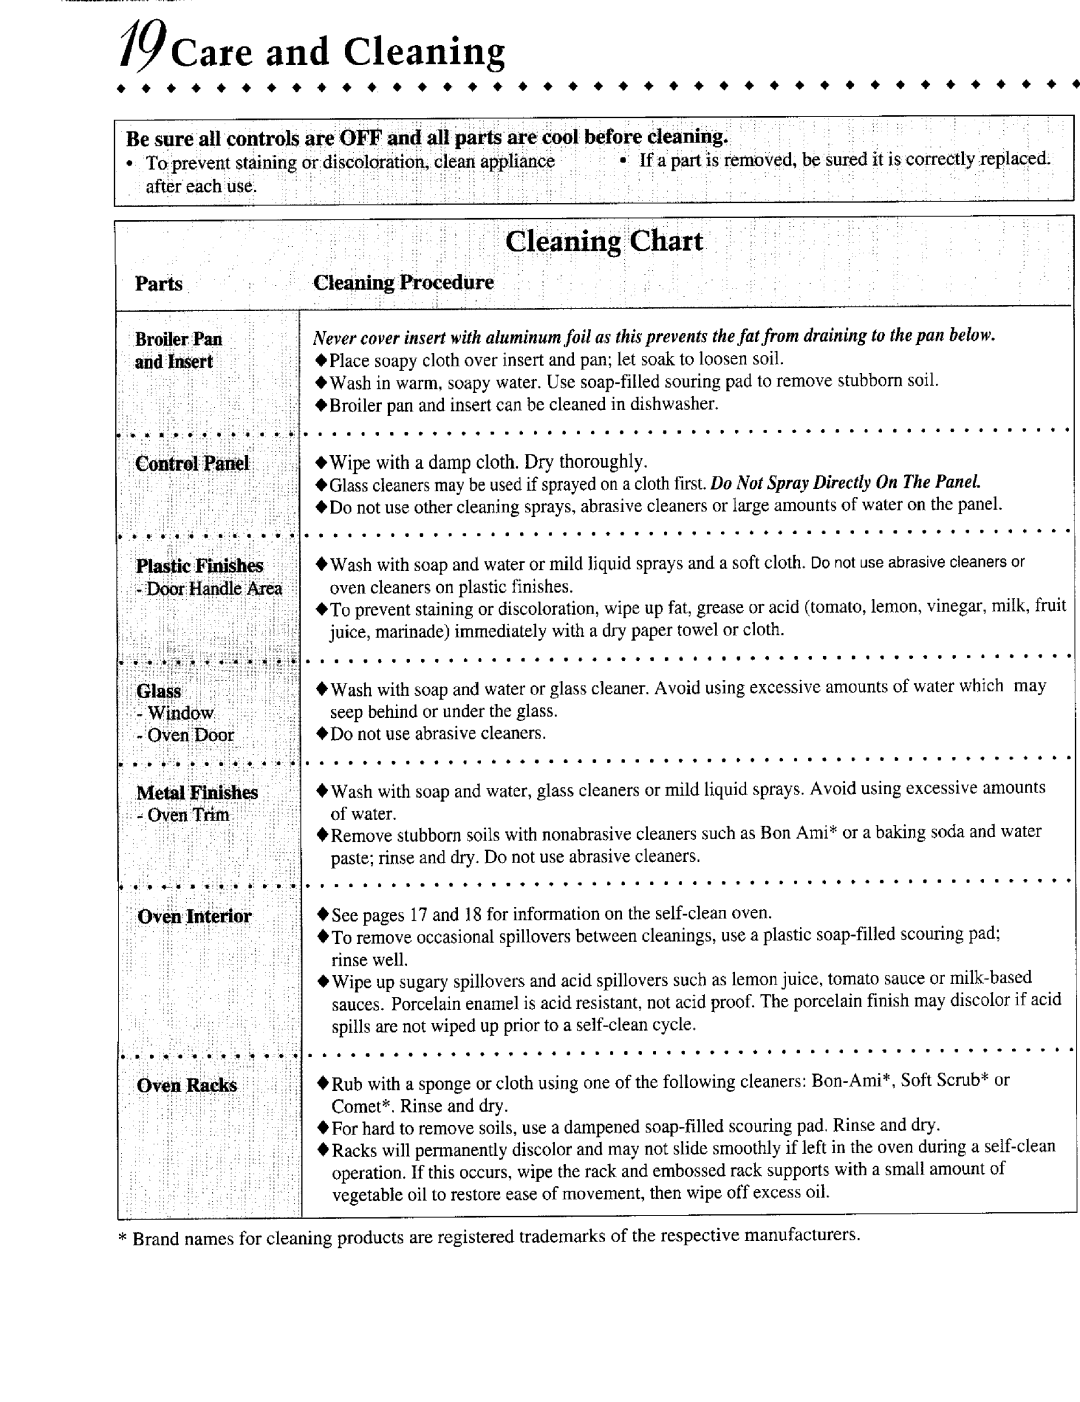 Jenn-Air JJW9527AAB, 81t2P180_60 warranty Care and Cleaning, Cleaning Chart 